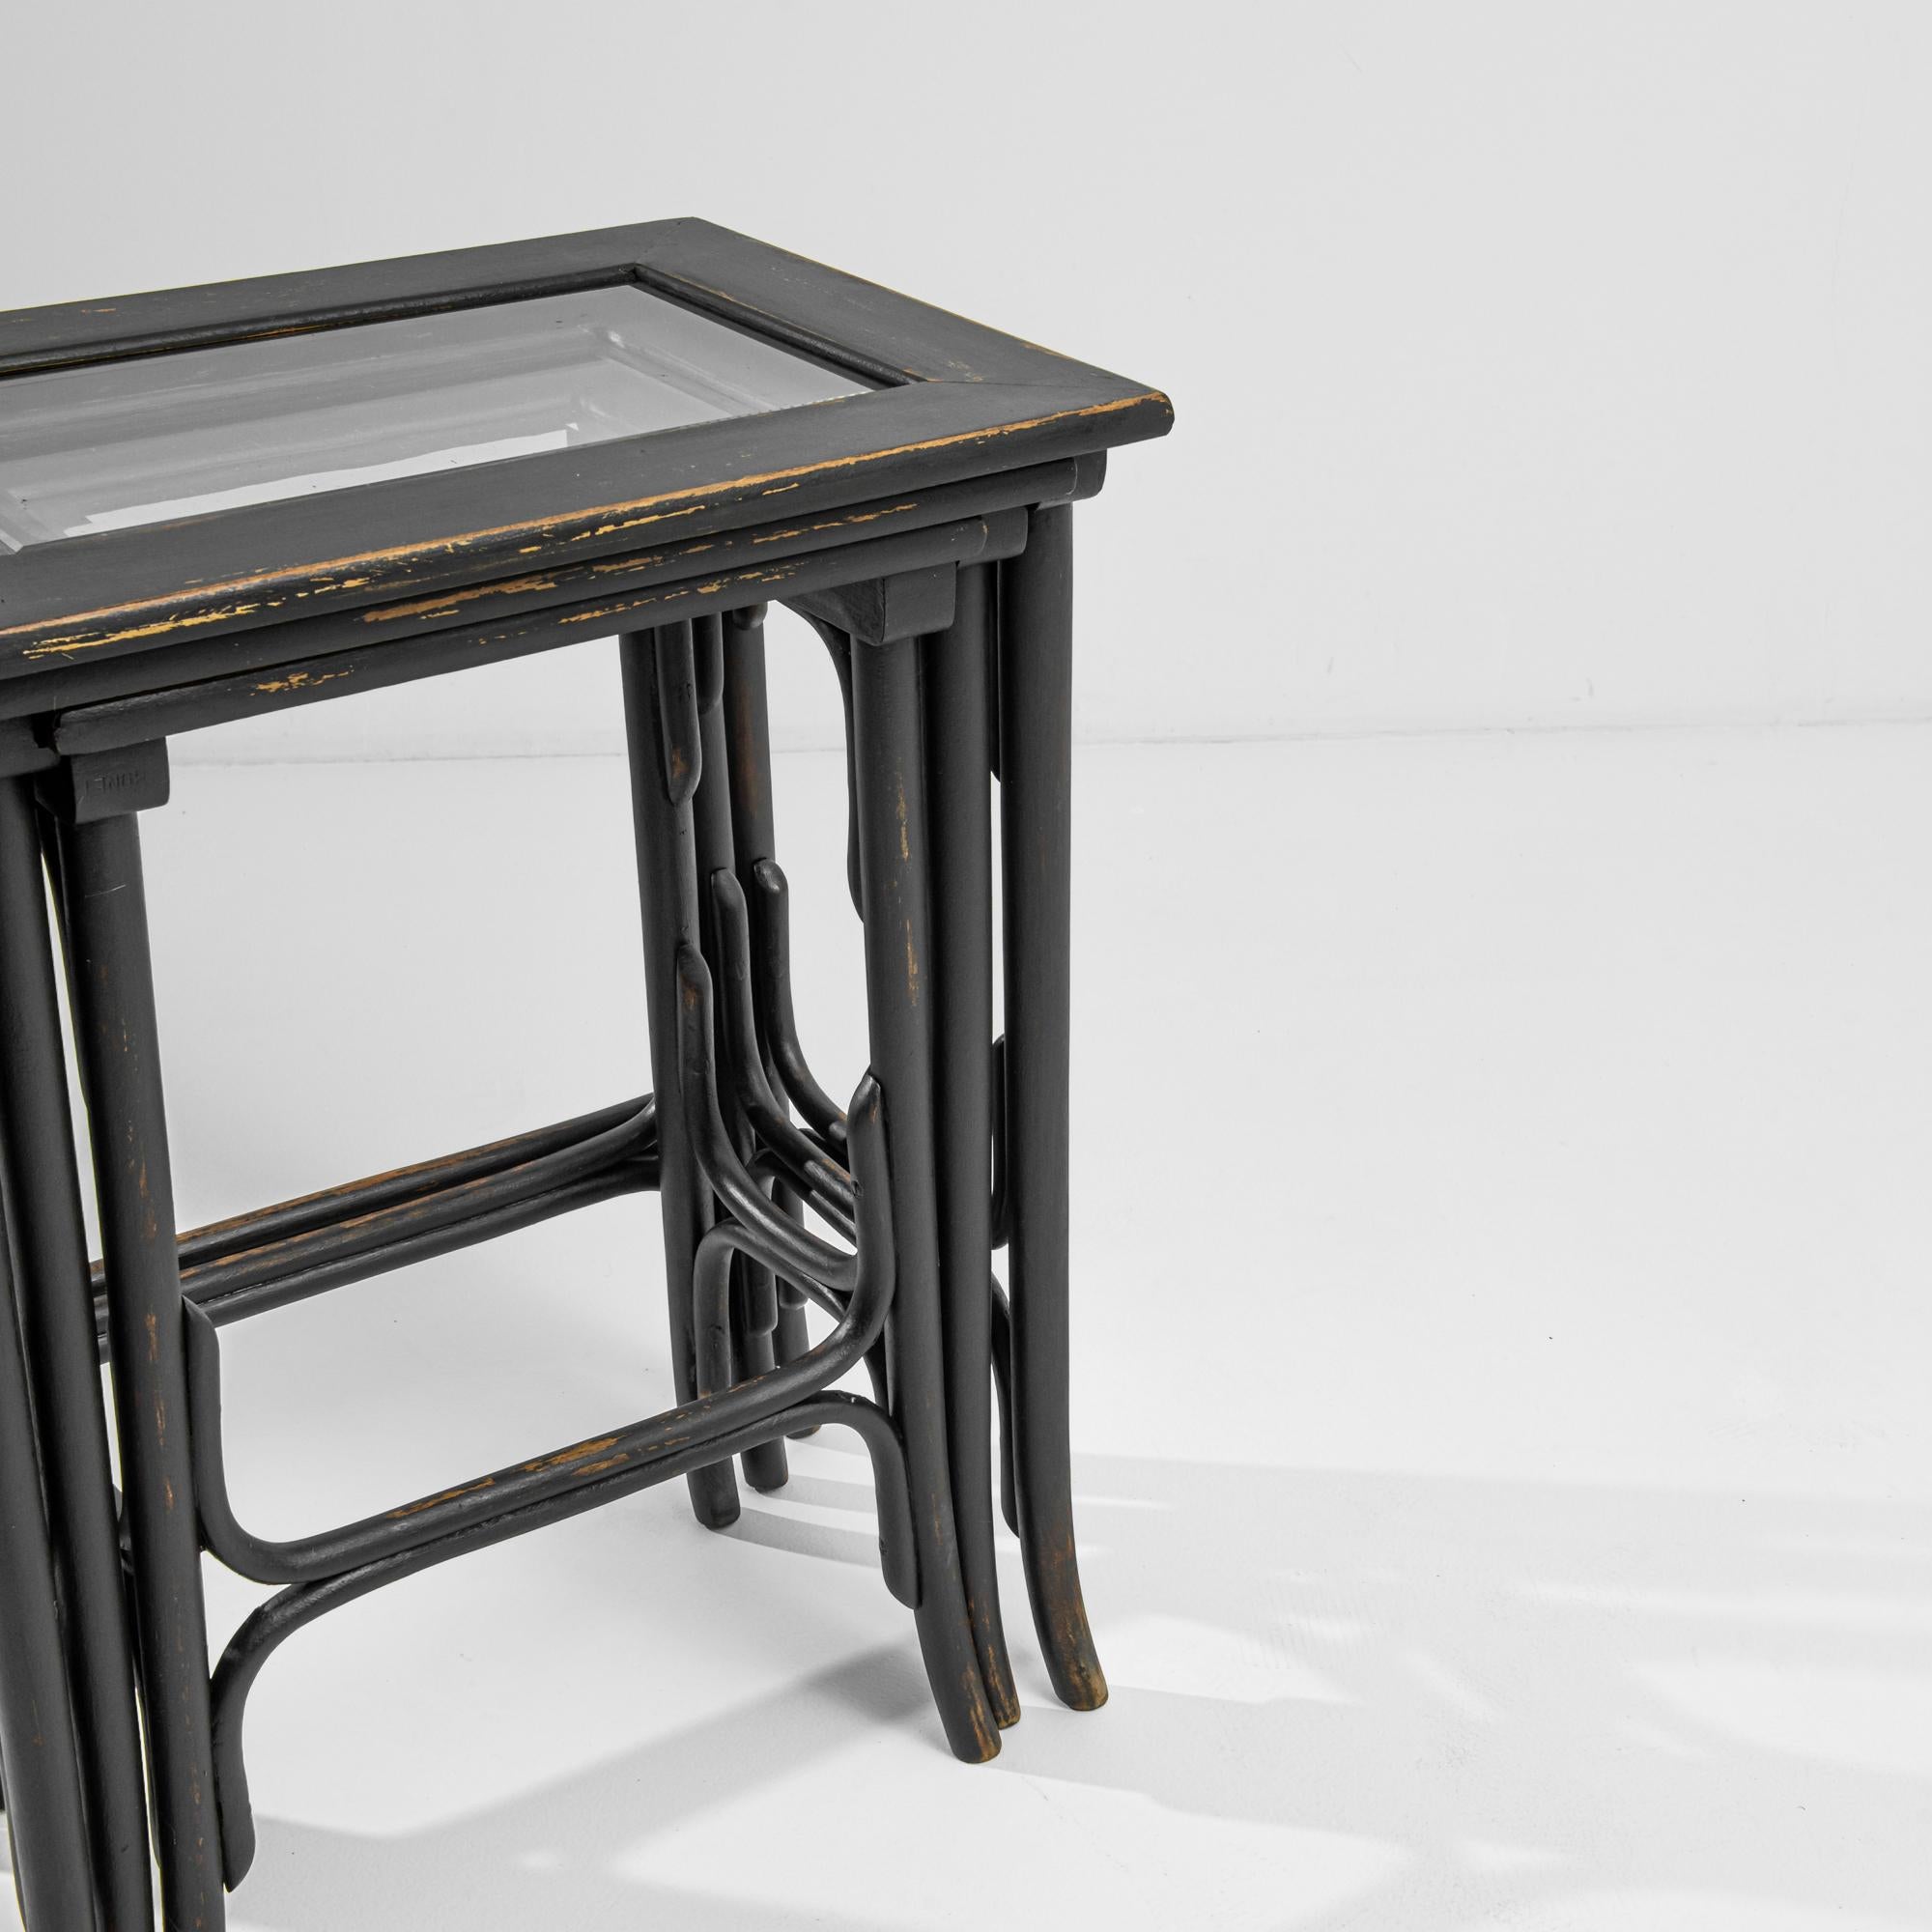 Czech 1920s Central European Wooden Nesting Table with Glass Top